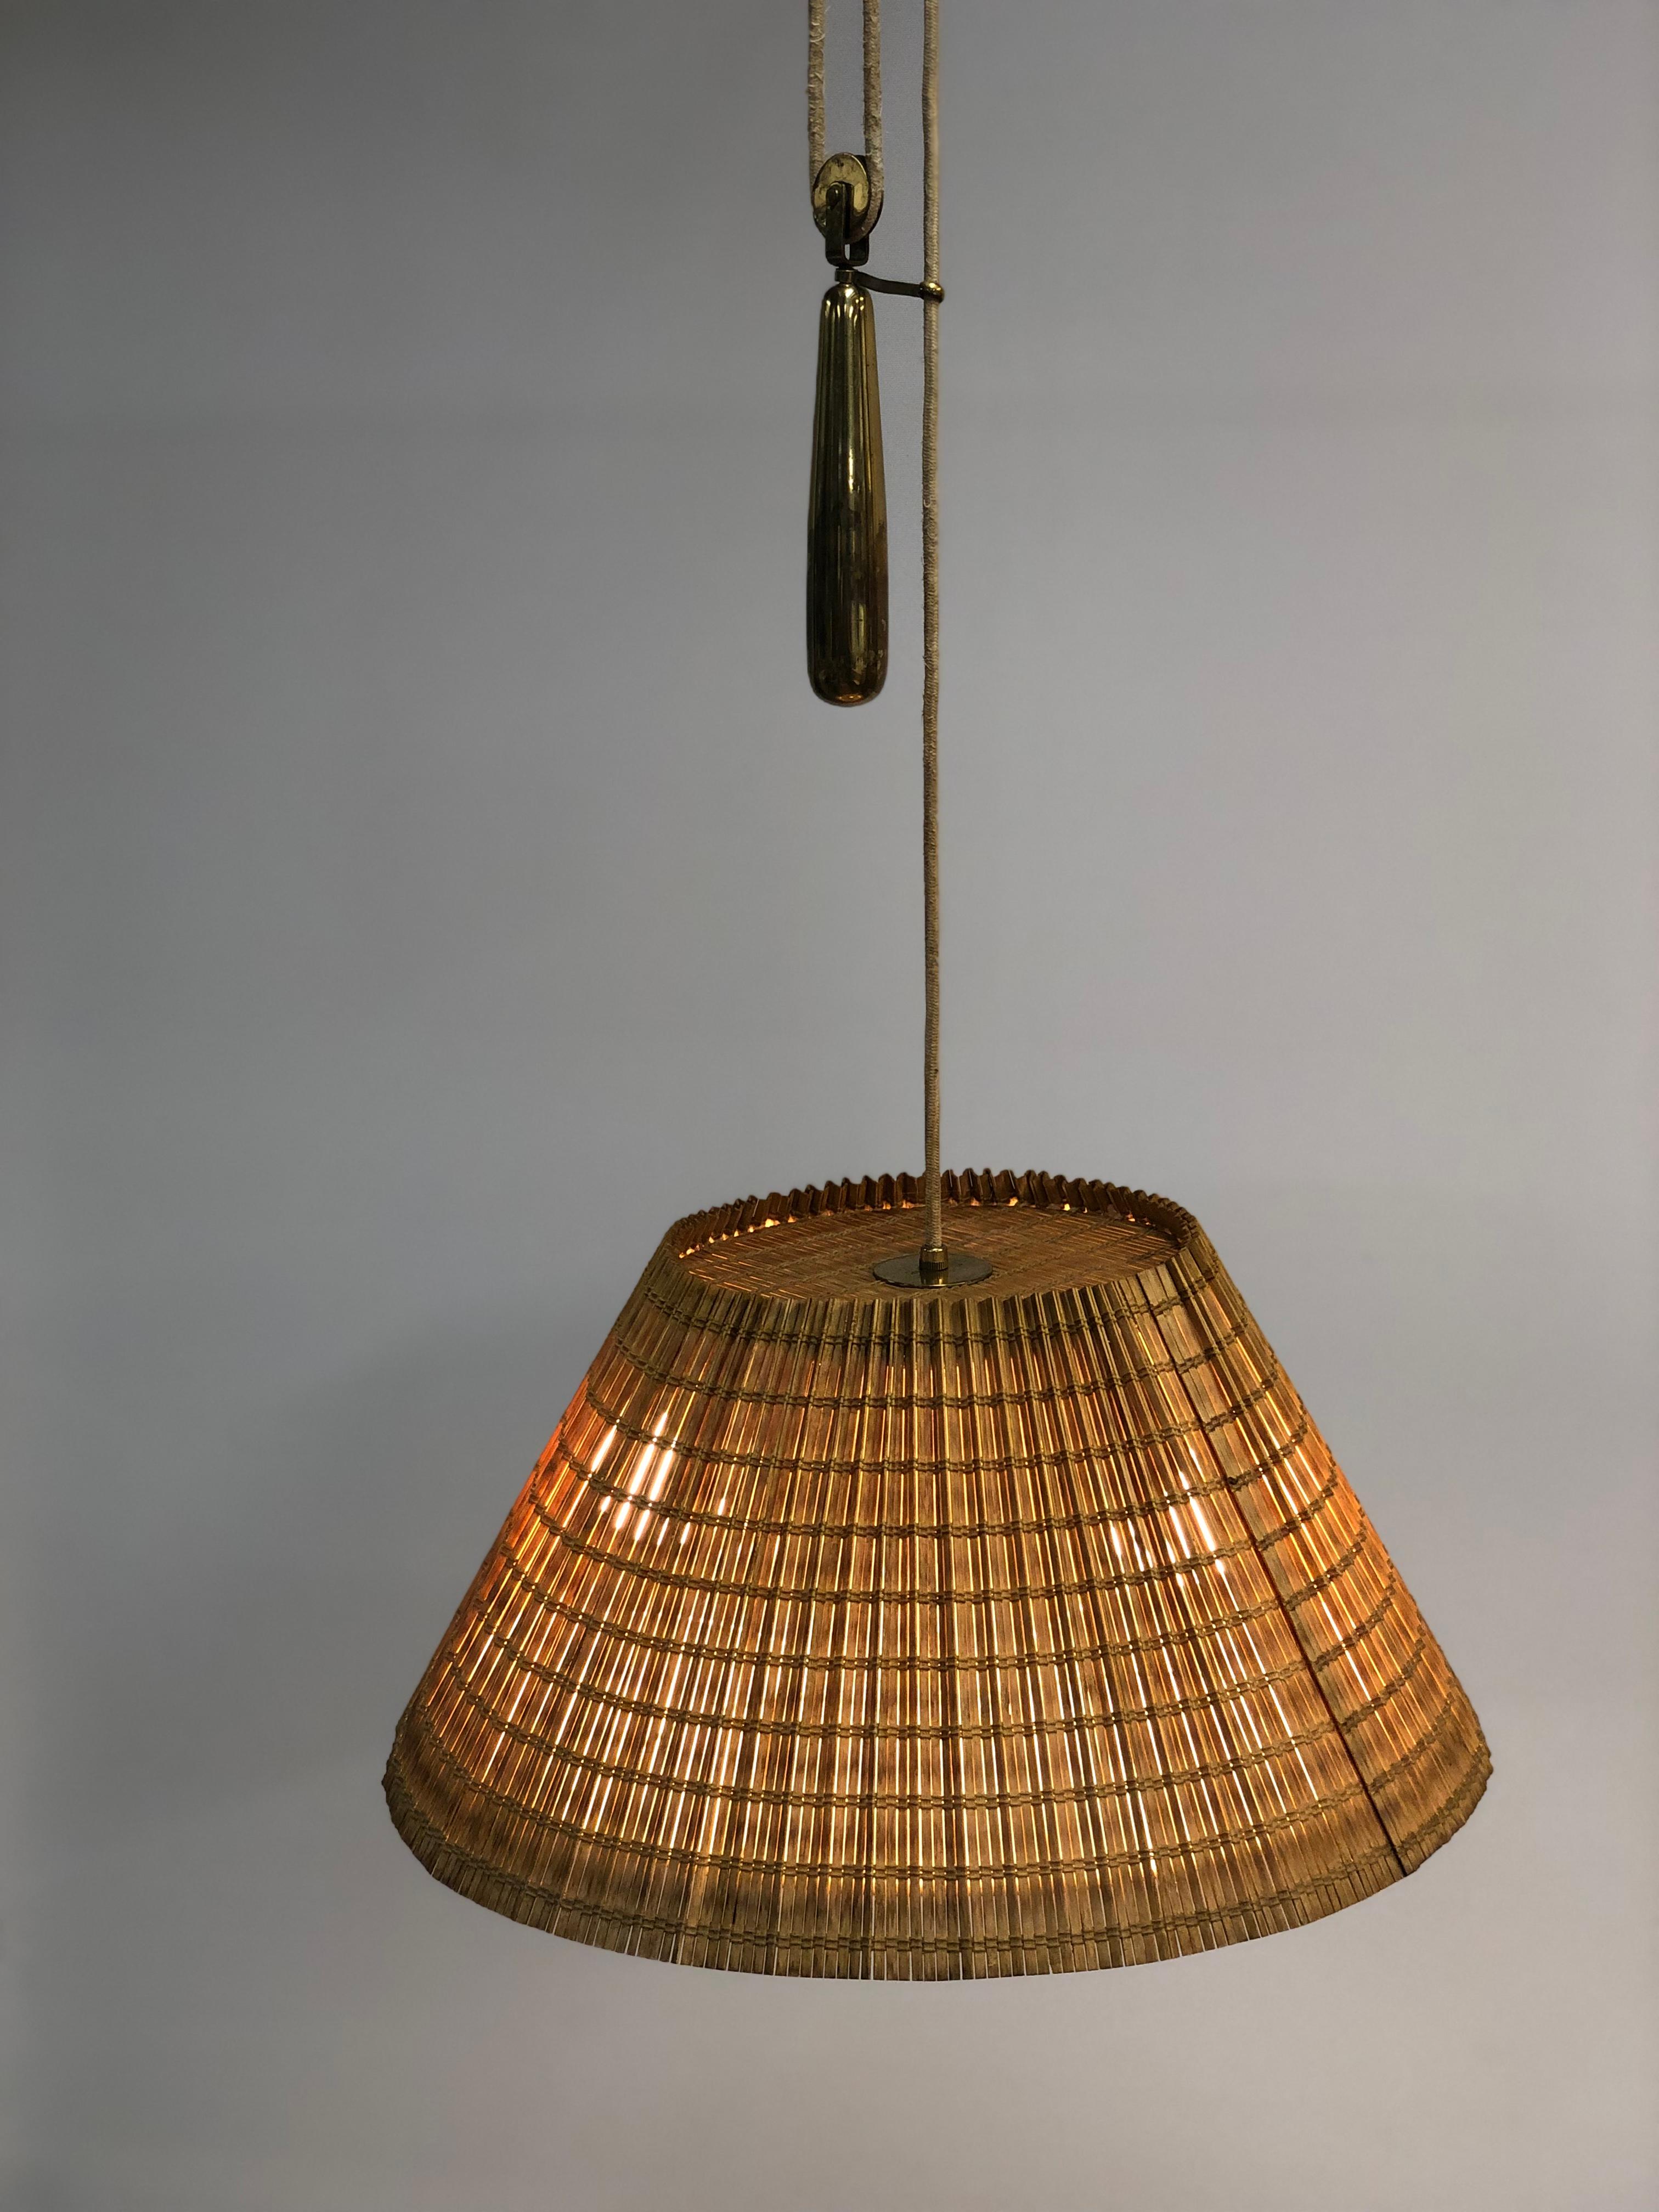 Scandinavian Modern Paavo Tynell ceiling lamp model 1968, Taito Oy For Sale